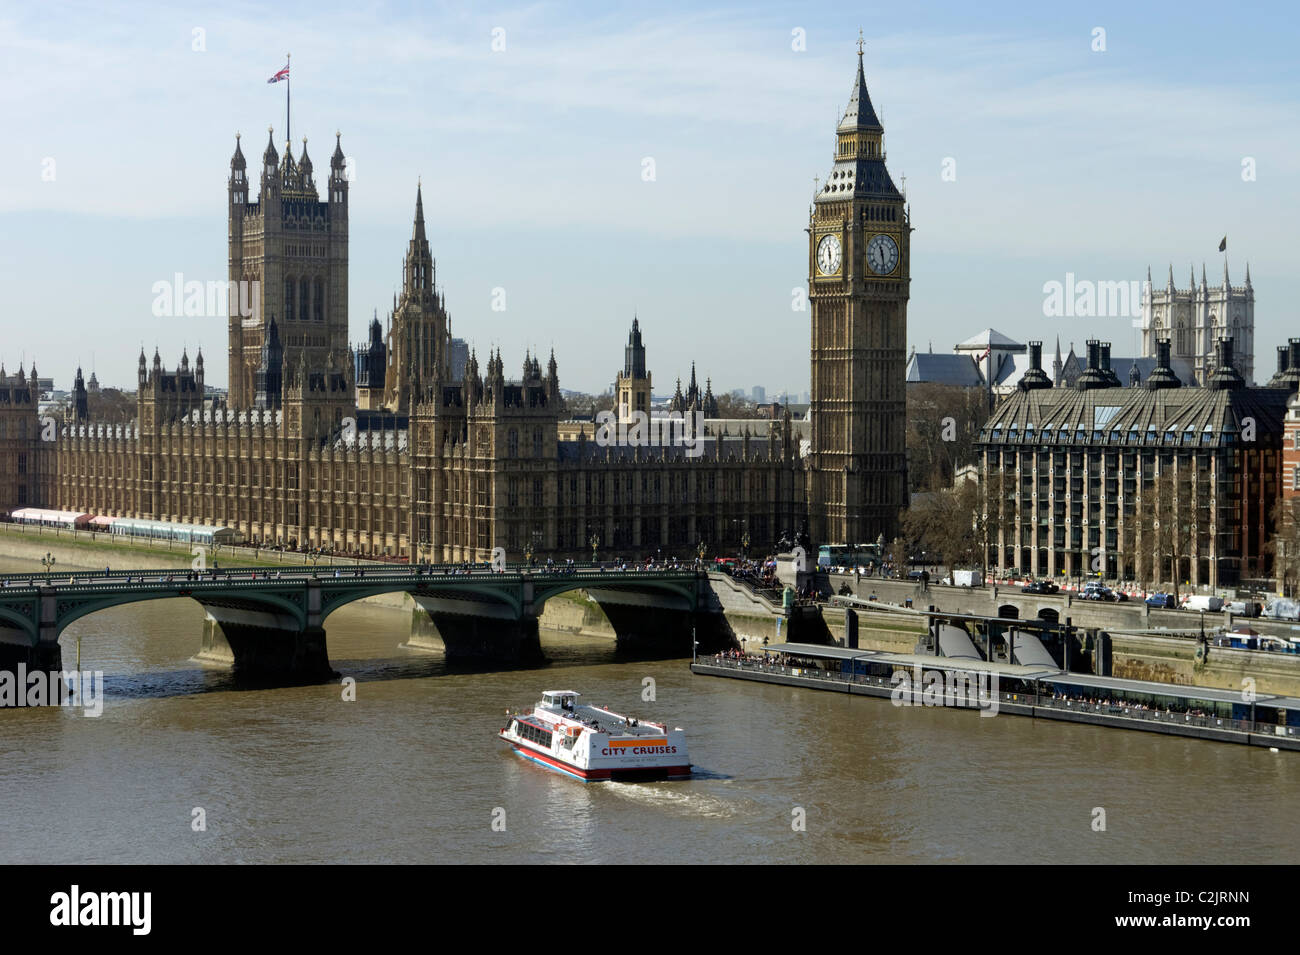 City Cruises boat passing by the Houses of Parliament, London, England, UK Stock Photo